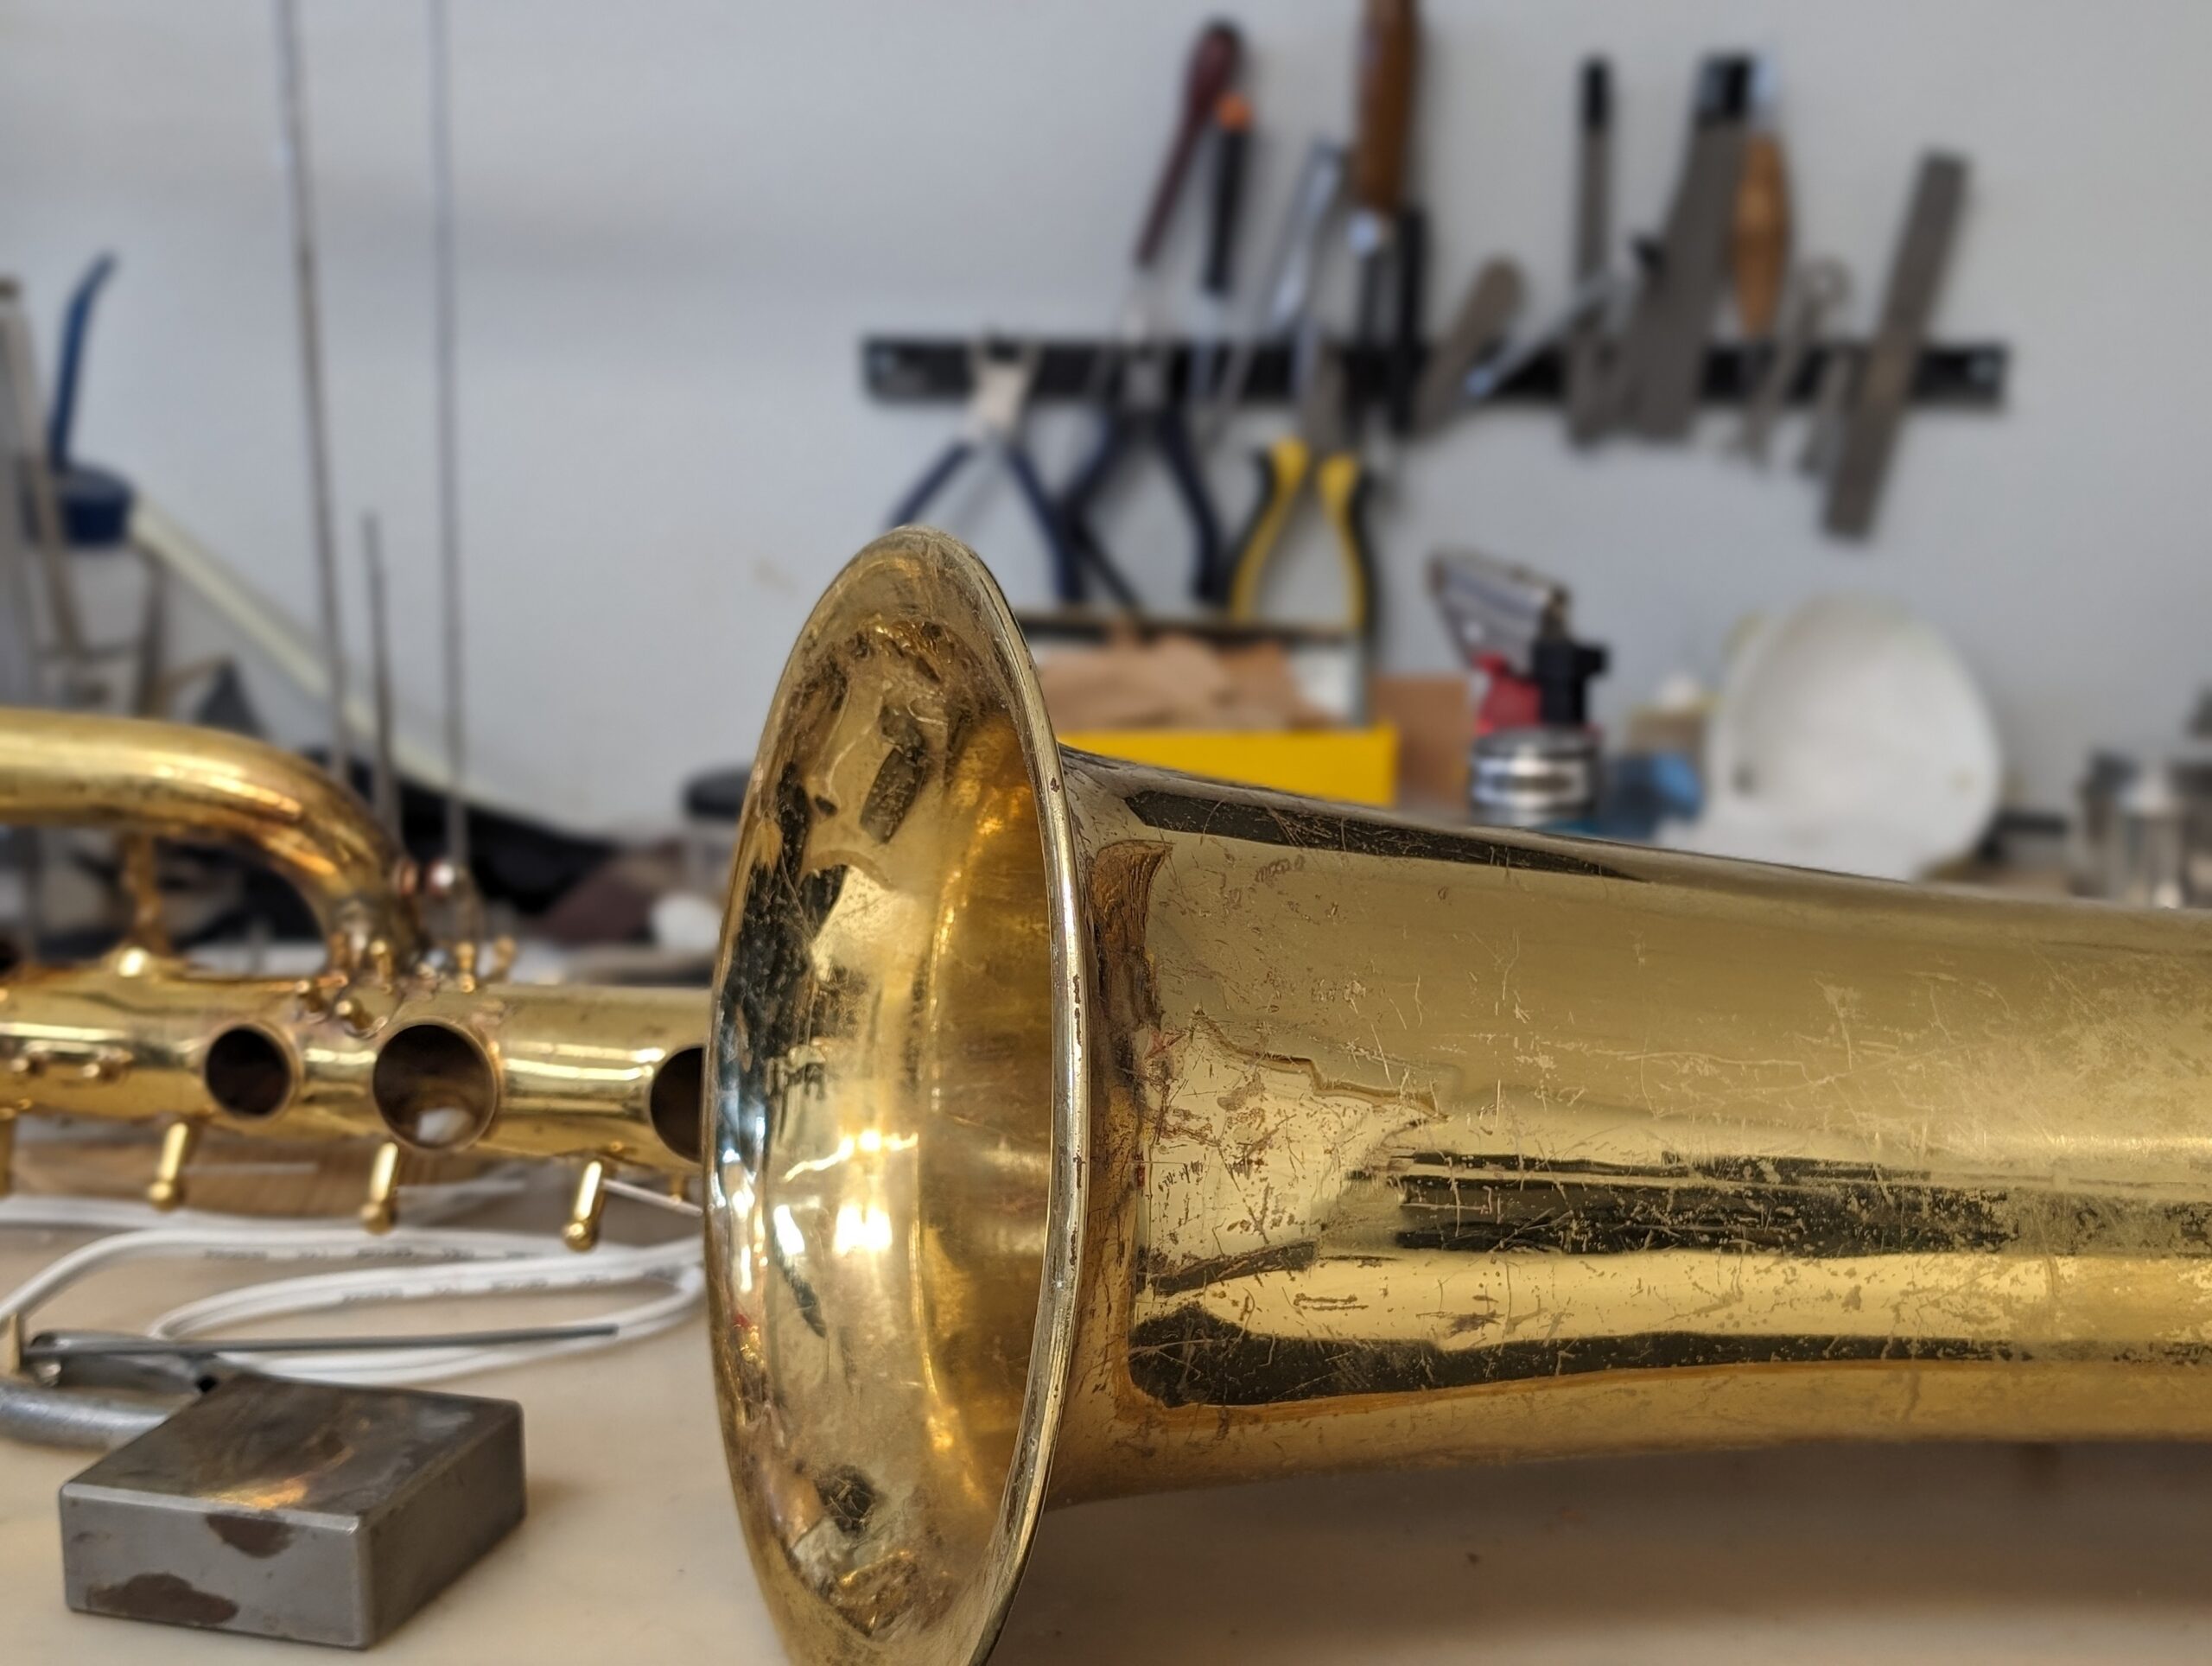 A Guide to Pursuing a Career in Musical Instrument Repair